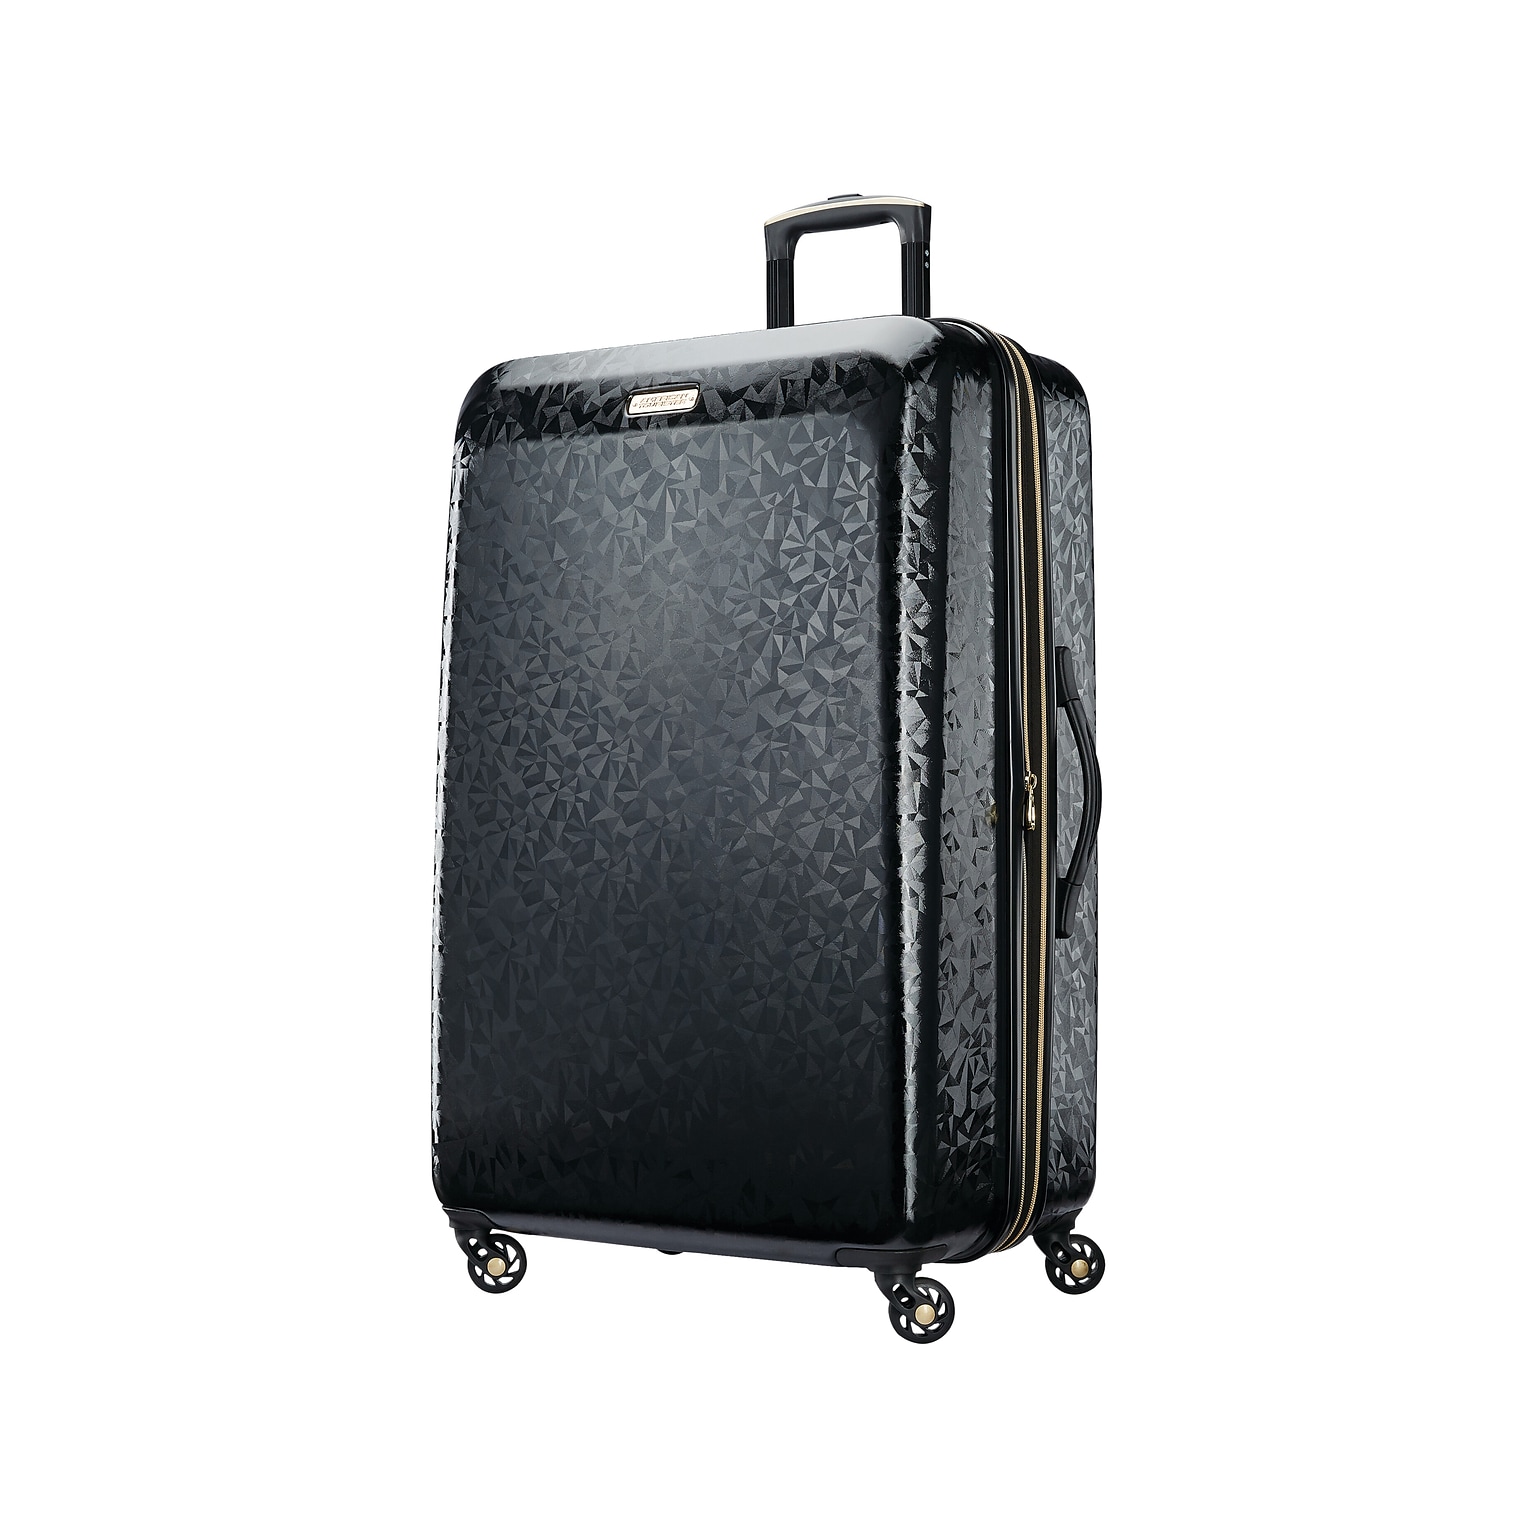 American Tourister Belle Voyage ABS Plastic 4-Wheel Spinner Luggage, Black (127052-1041)